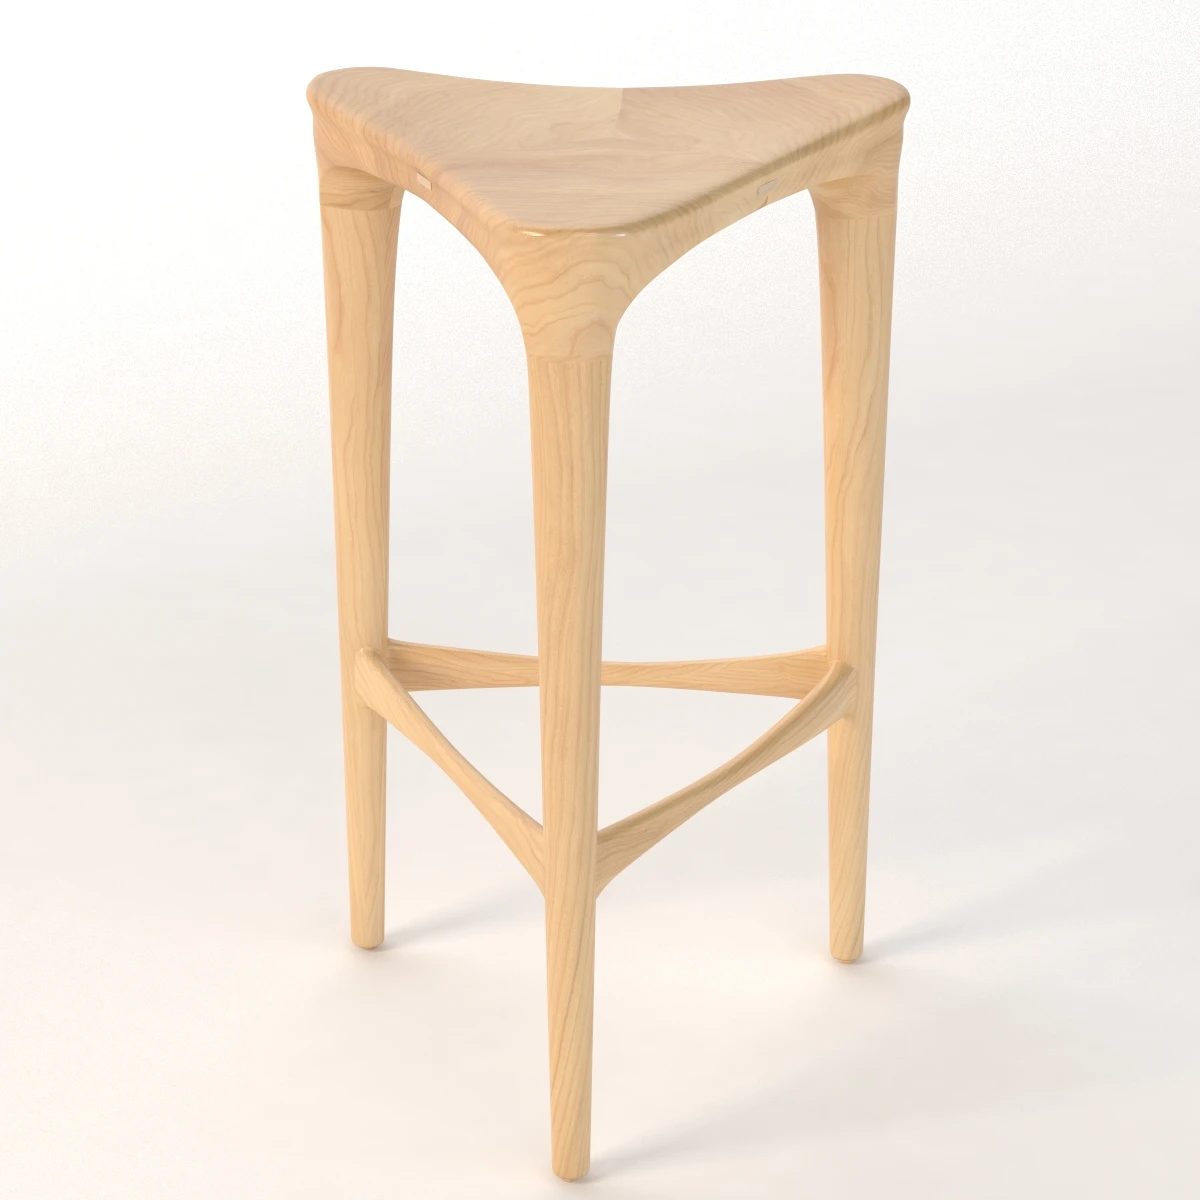 2 By 3 Wood Stools Geiger 3D Model_01